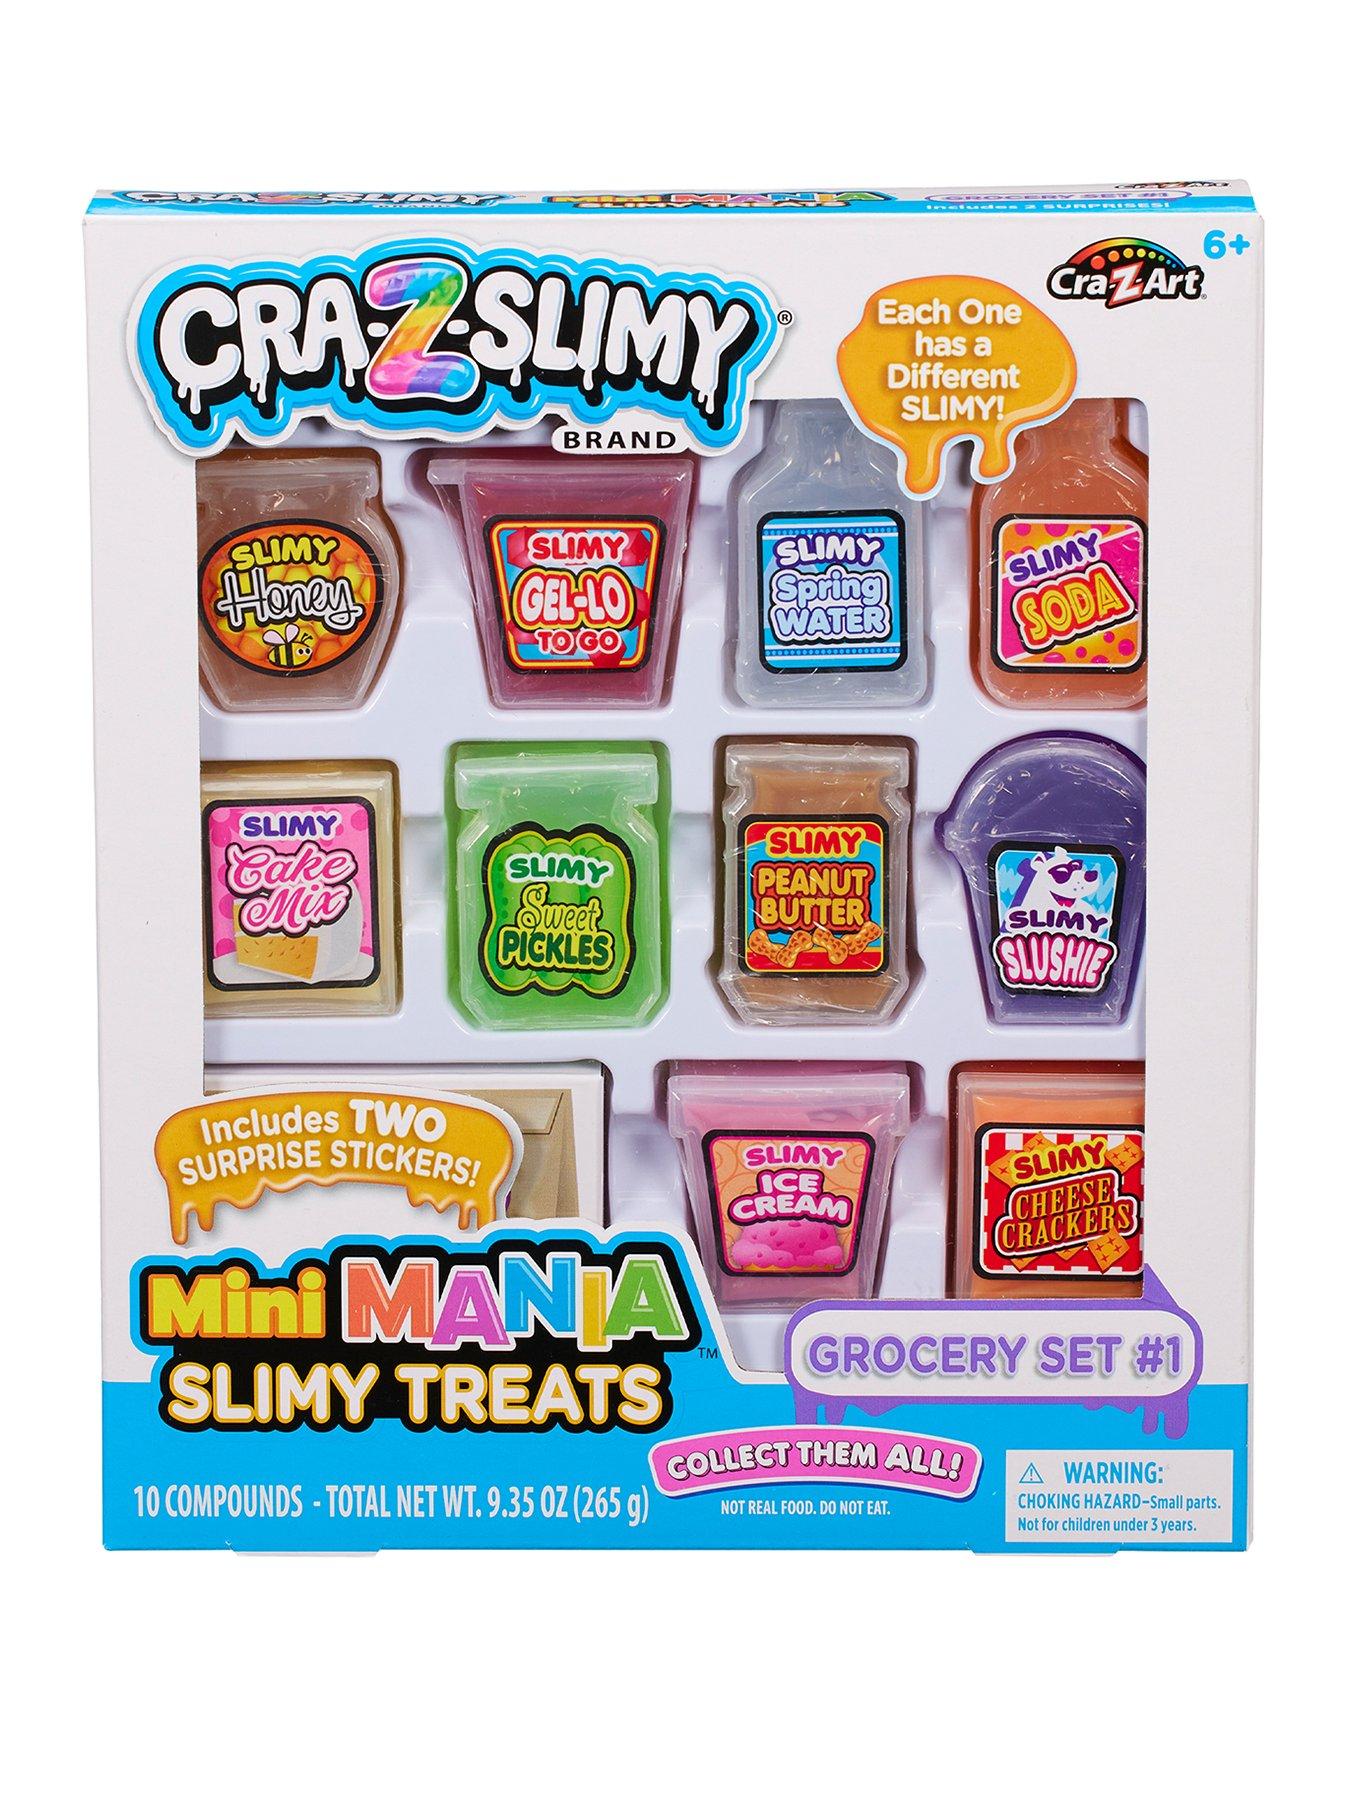 Get Ready to Twist and Slime: Introducing the So Slime Twist 'n' Slime Mixer!  - Canal Toys UK